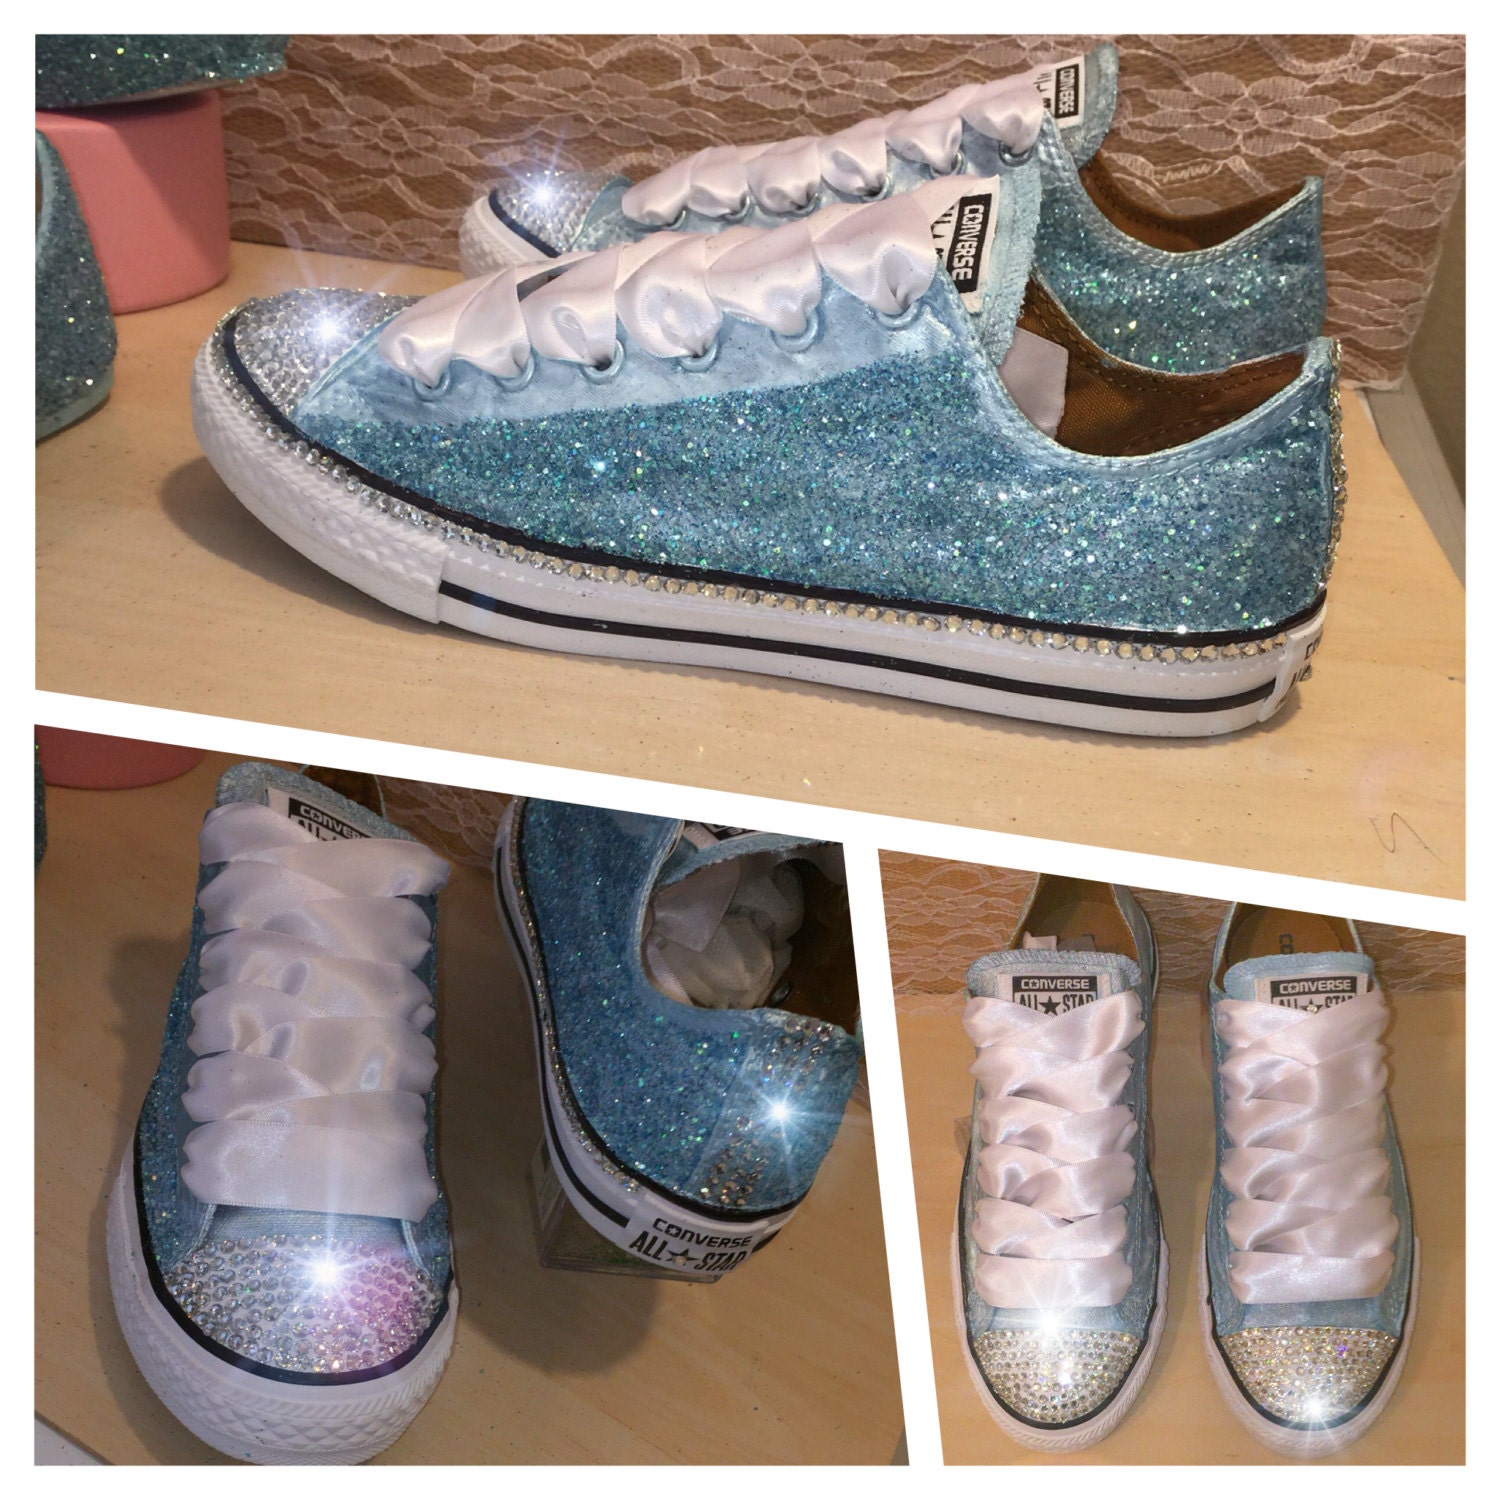 Women's Converse all star metallic BLUE sparkly by CrystalCleatss